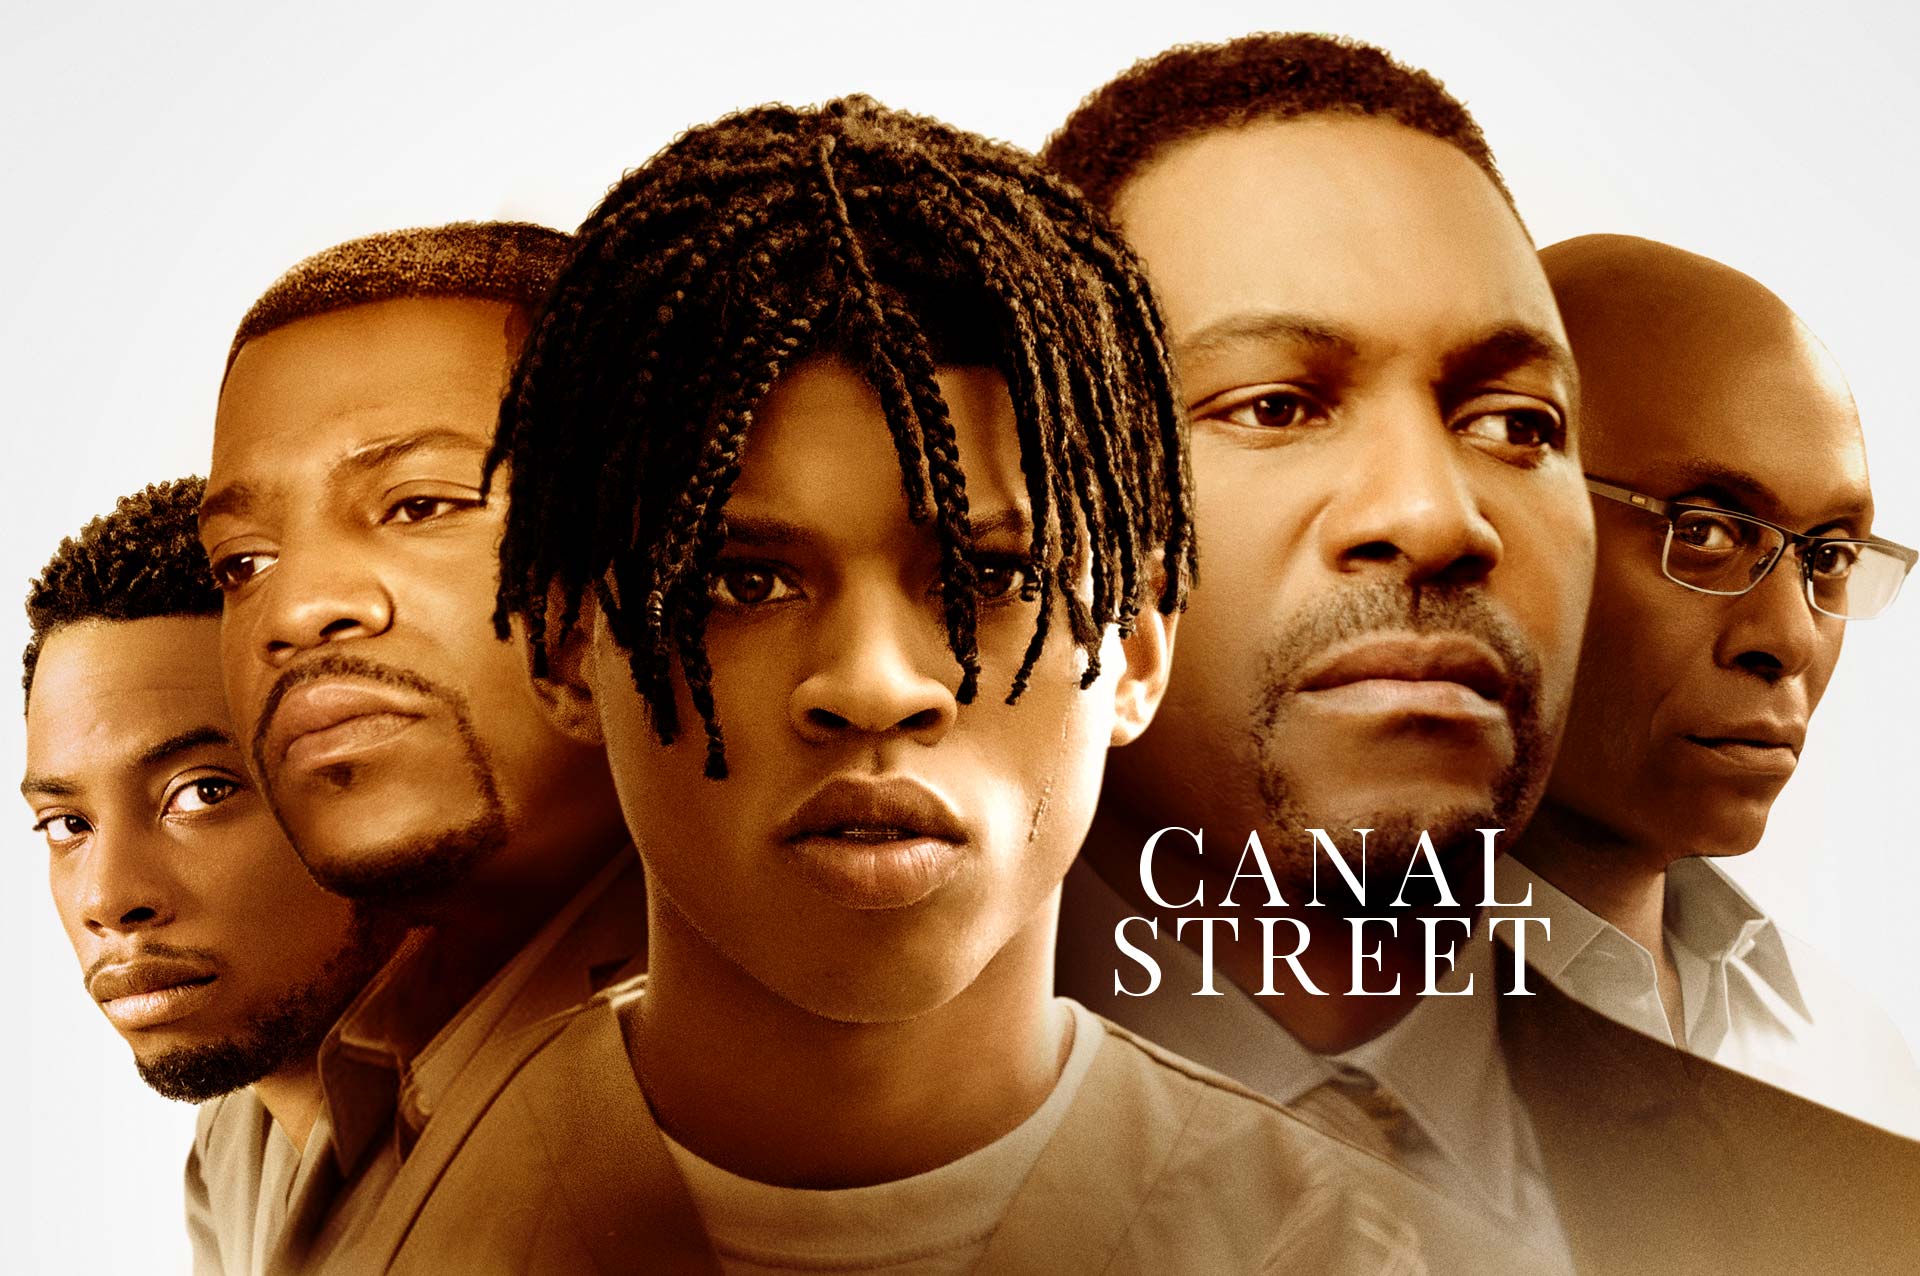 40 Best Pictures Canal Street Movie Review / Via Canal Street | Manchester Bar Reviews | DesignMyNight